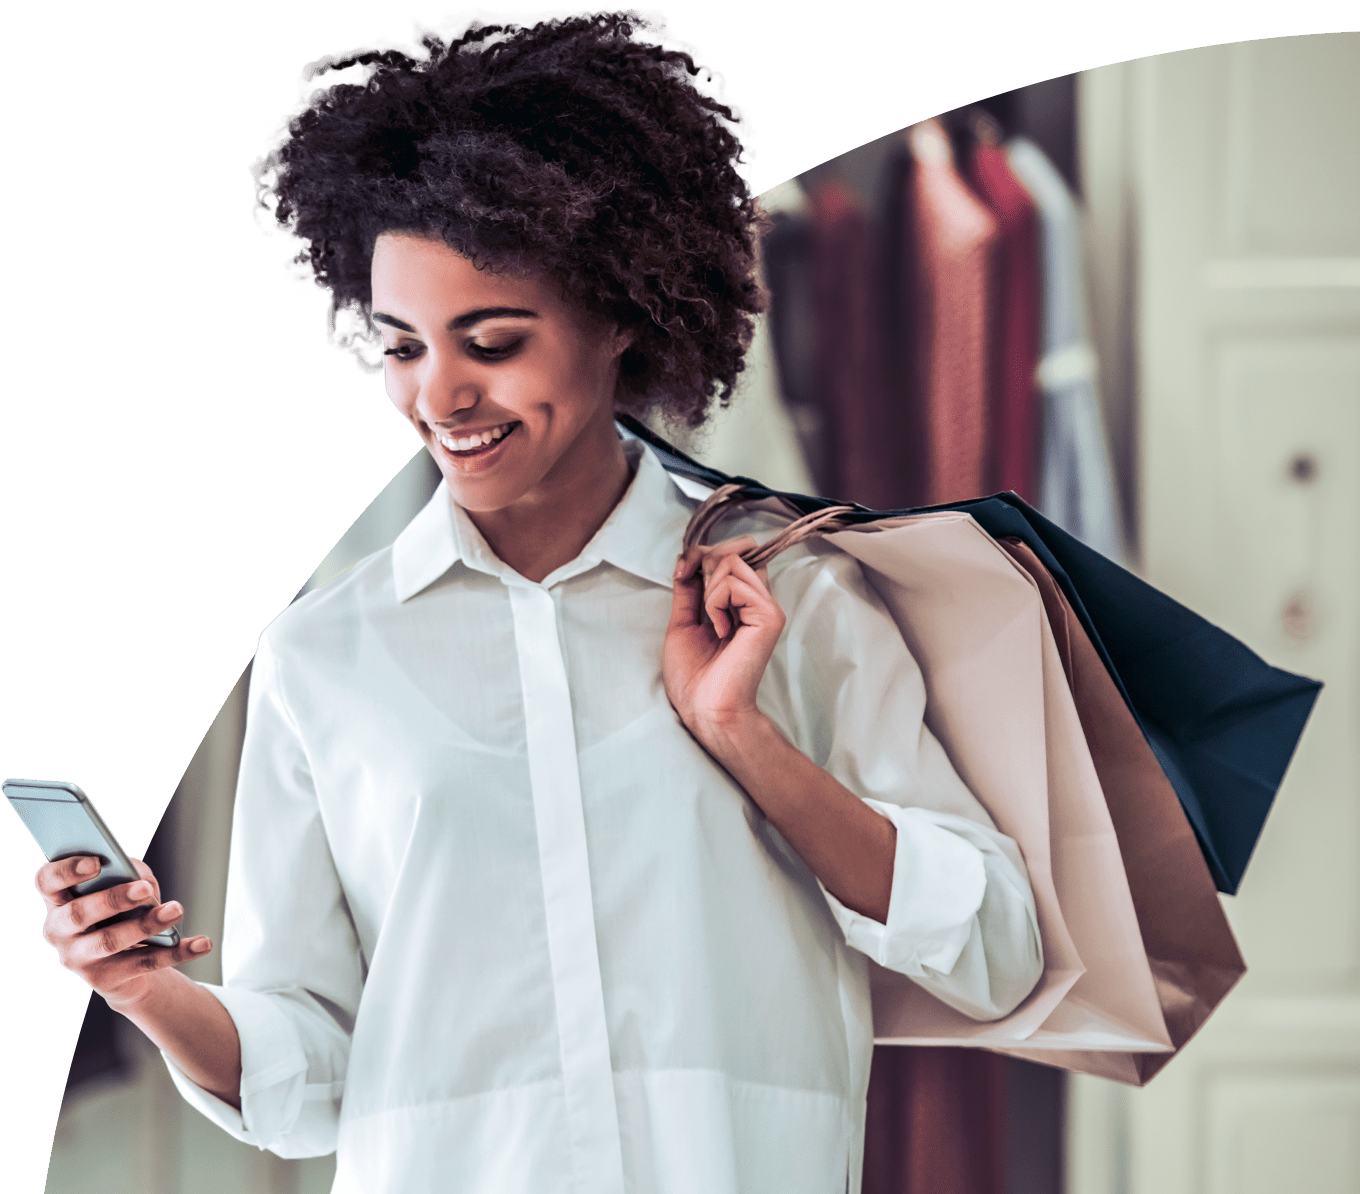 Woman looking at phone while shopping